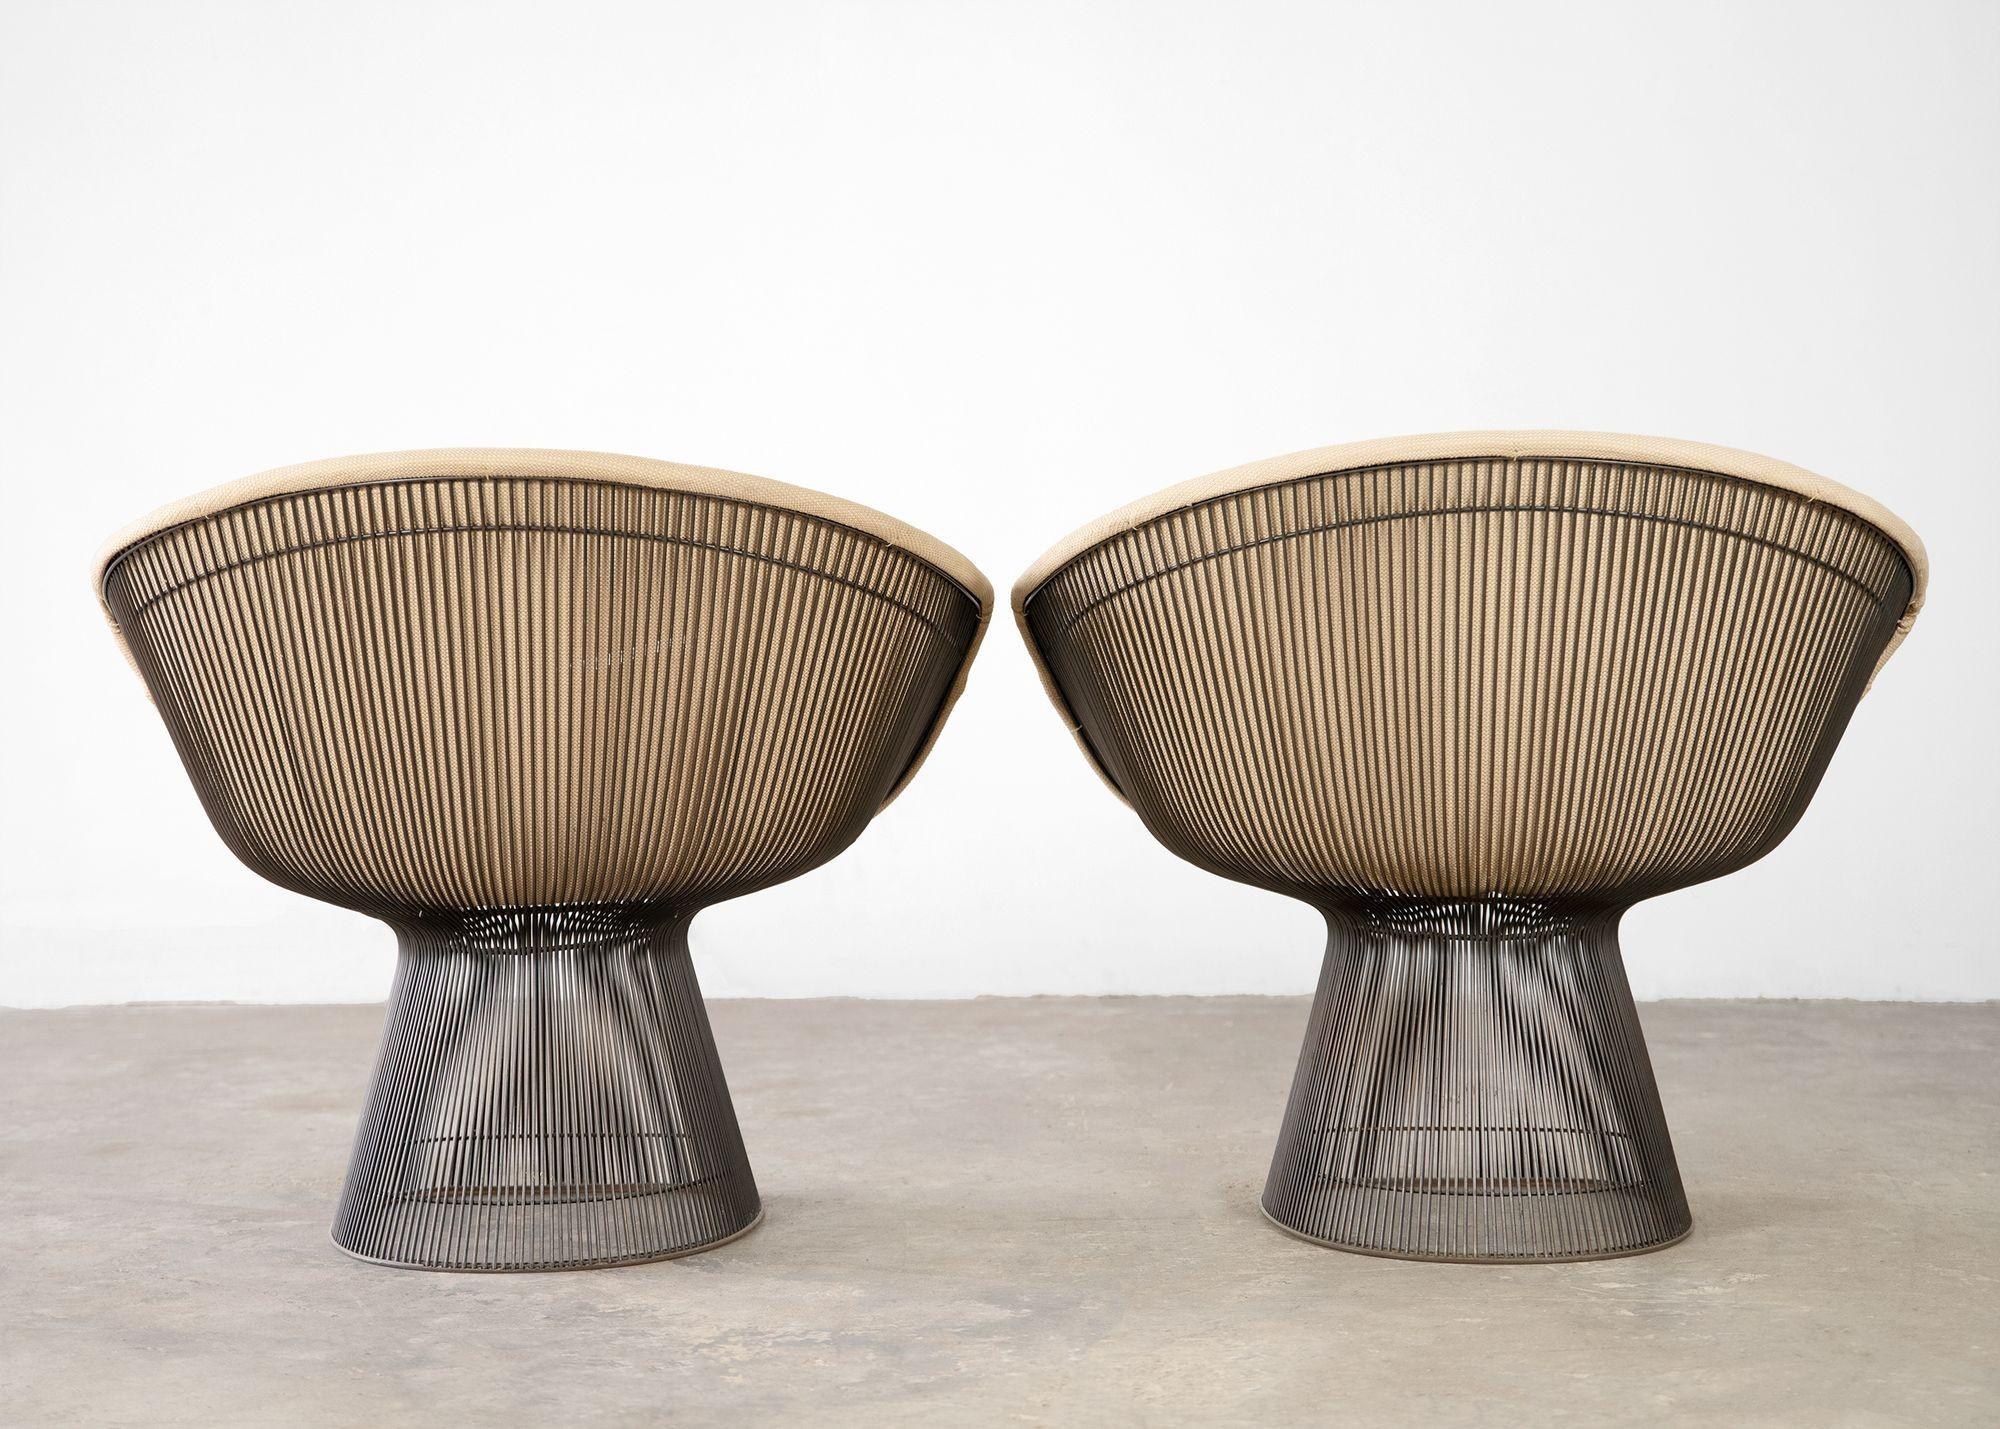 Mid-Century Modern Lounge Chairs Designed by Warren Platner 1966 for Knoll International For Sale